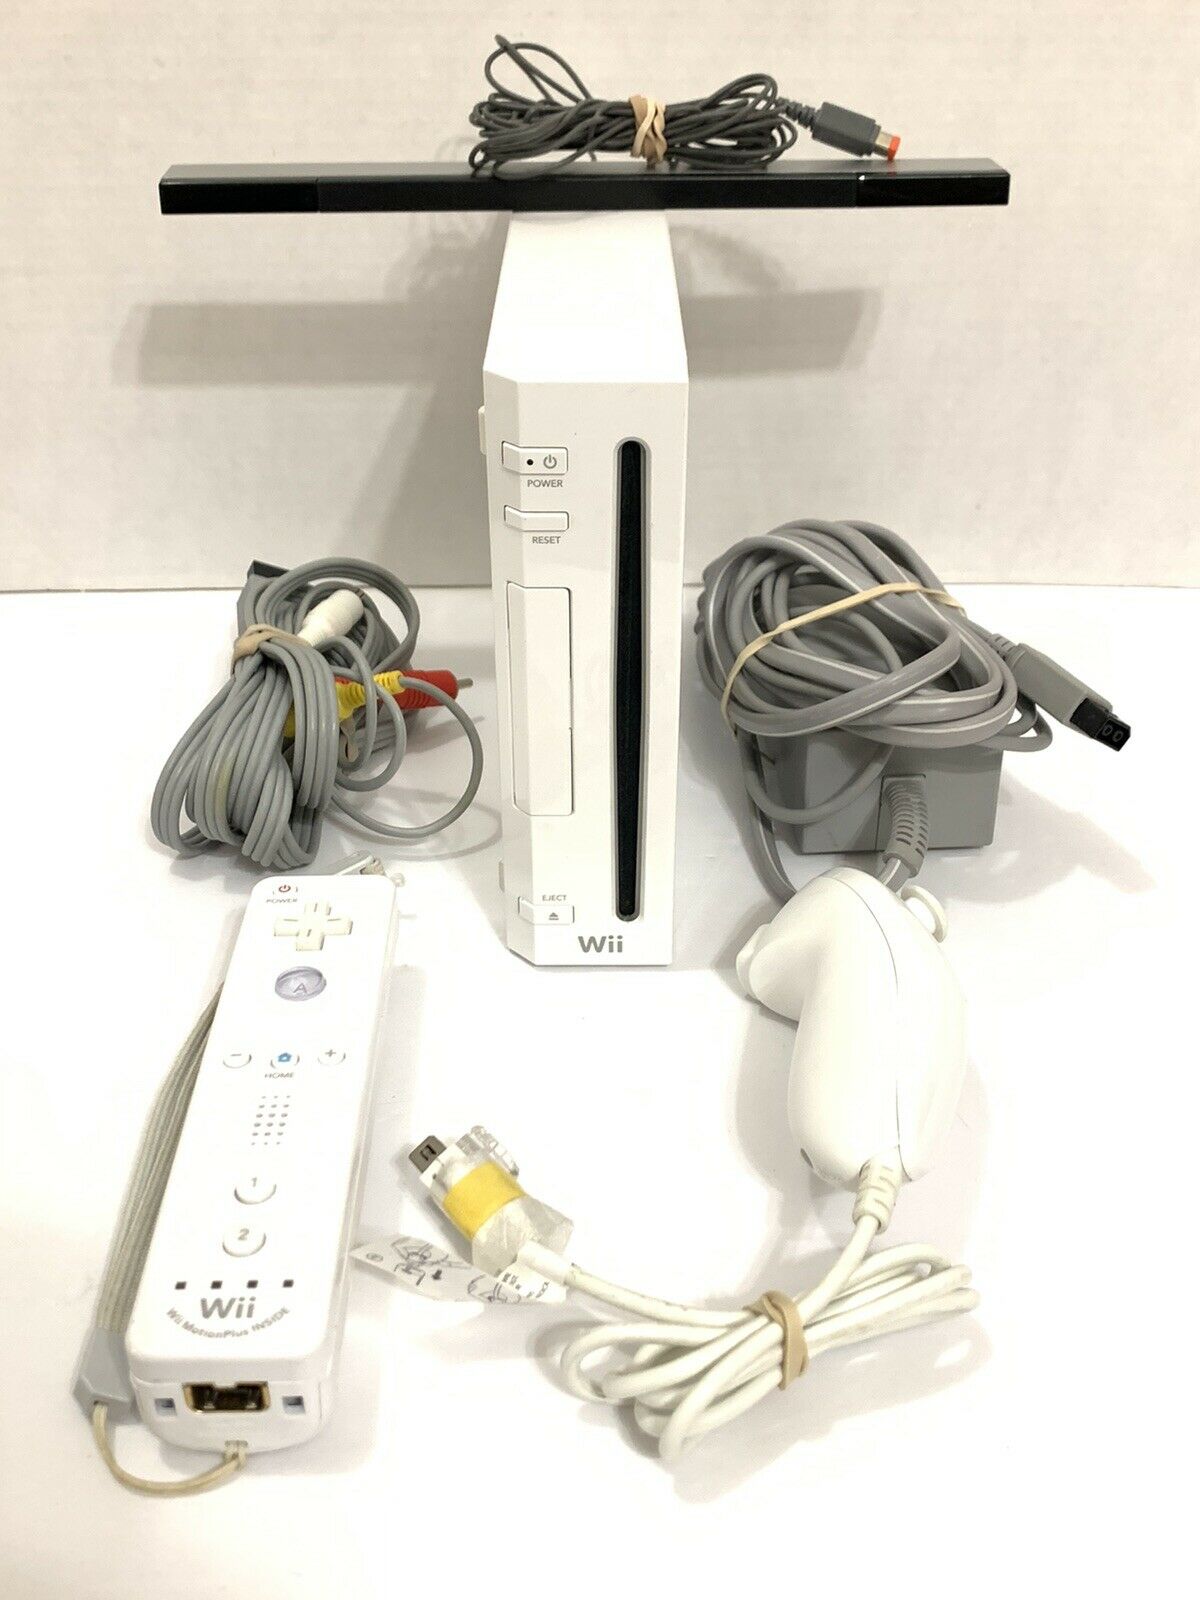 Nintendo Wii Console White Rvl 001 Bundle With Motion Plus Controller And Cables Icommerce On Web 4029